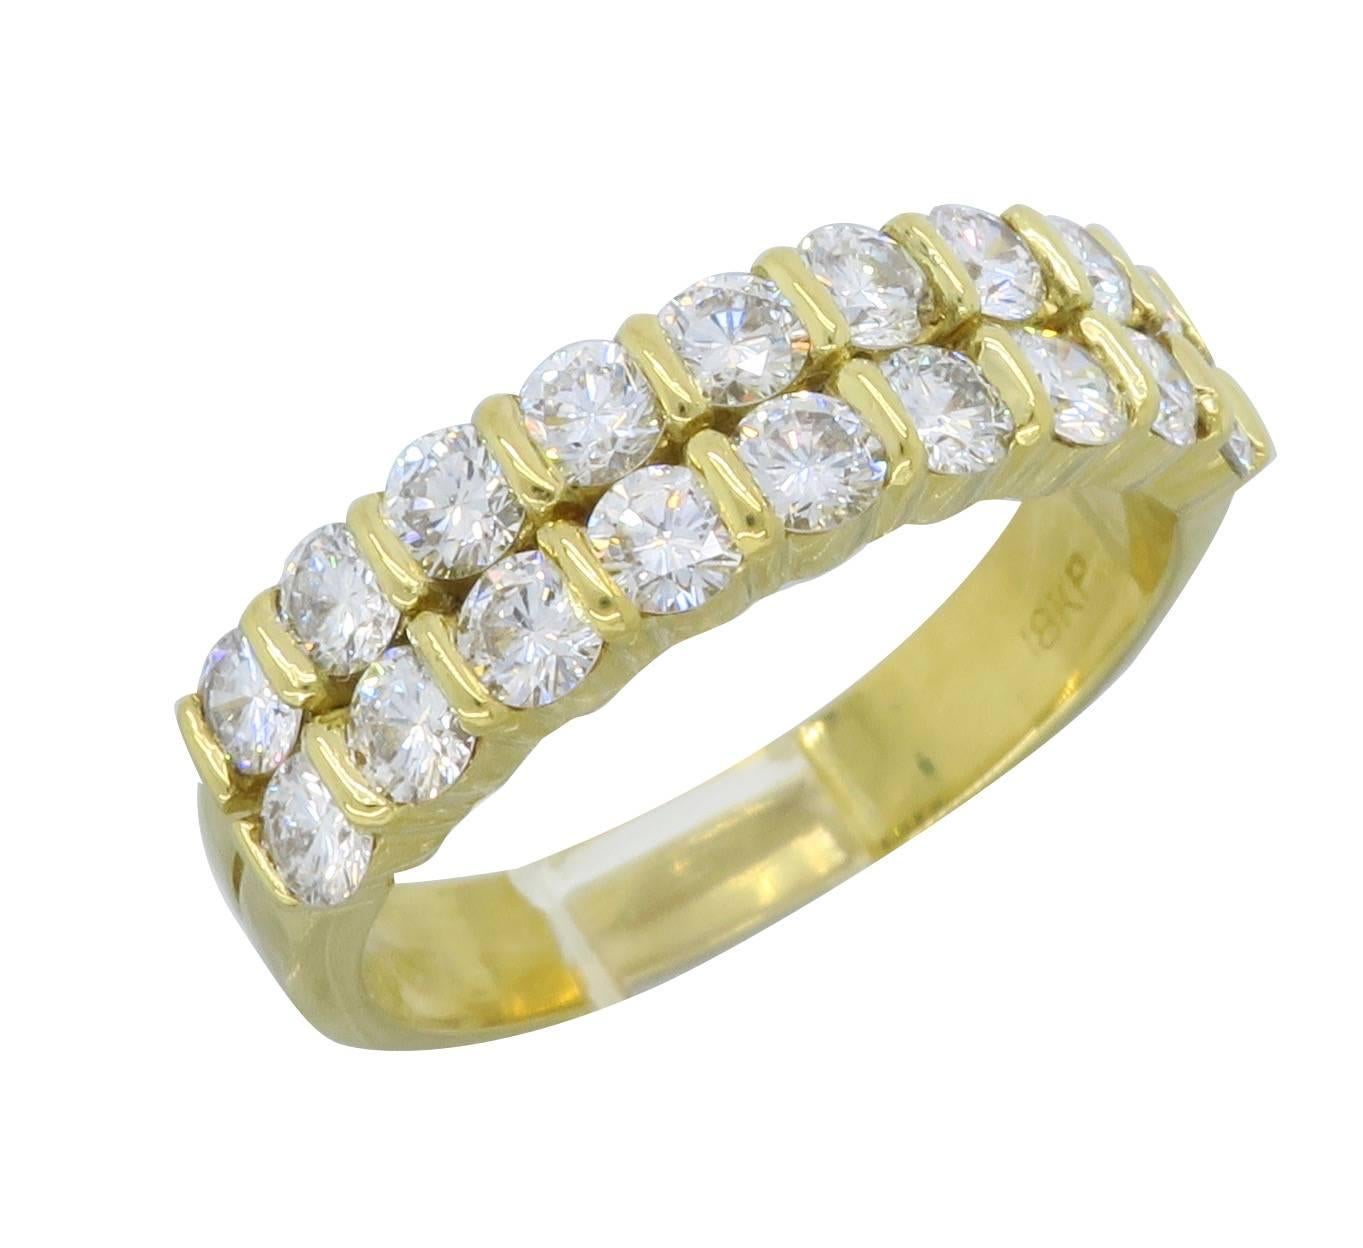 18k Yellow Gold diamond band with 18 Round Brilliant cut diamonds, bar set, with an approximate total carat weight of 1.26ctw. The diamonds display an average color of H-I and average clarity of VS. The ring is currently a size 6.75 and weighs 5.0